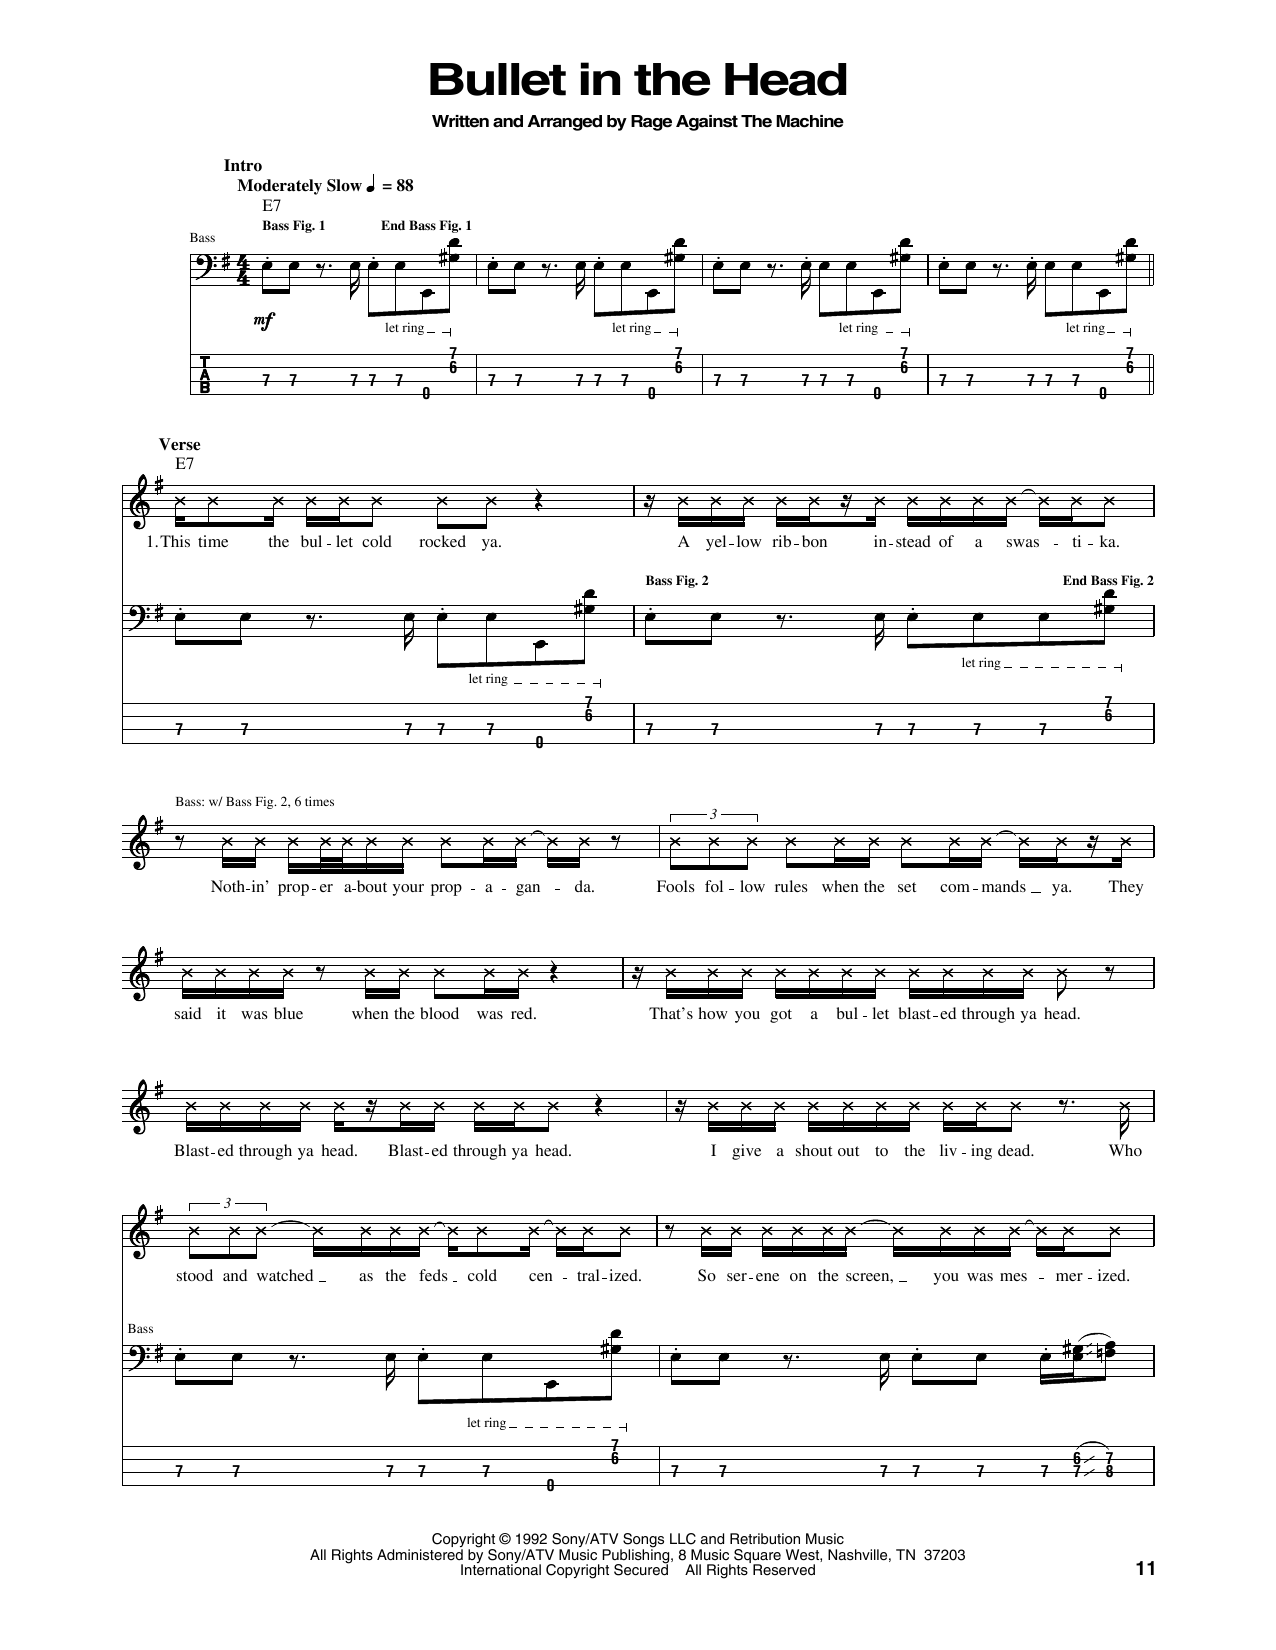 Download Rage Against The Machine Bullet In The Head Sheet Music